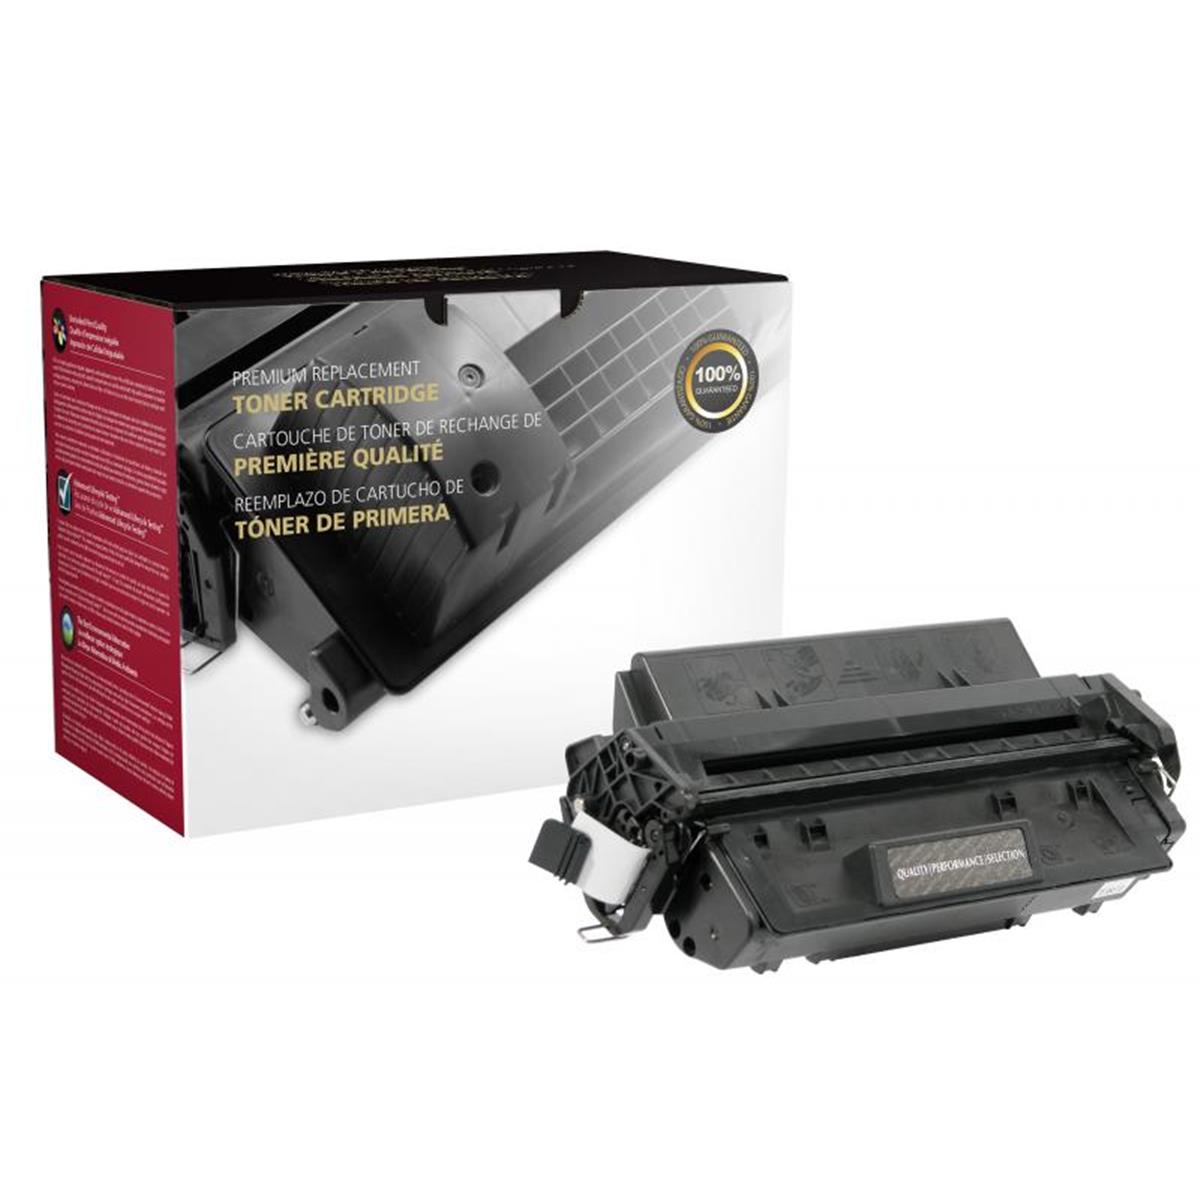 Picture of Canon 200035 Toner Cartridge for Canon 6812A001AA-L50